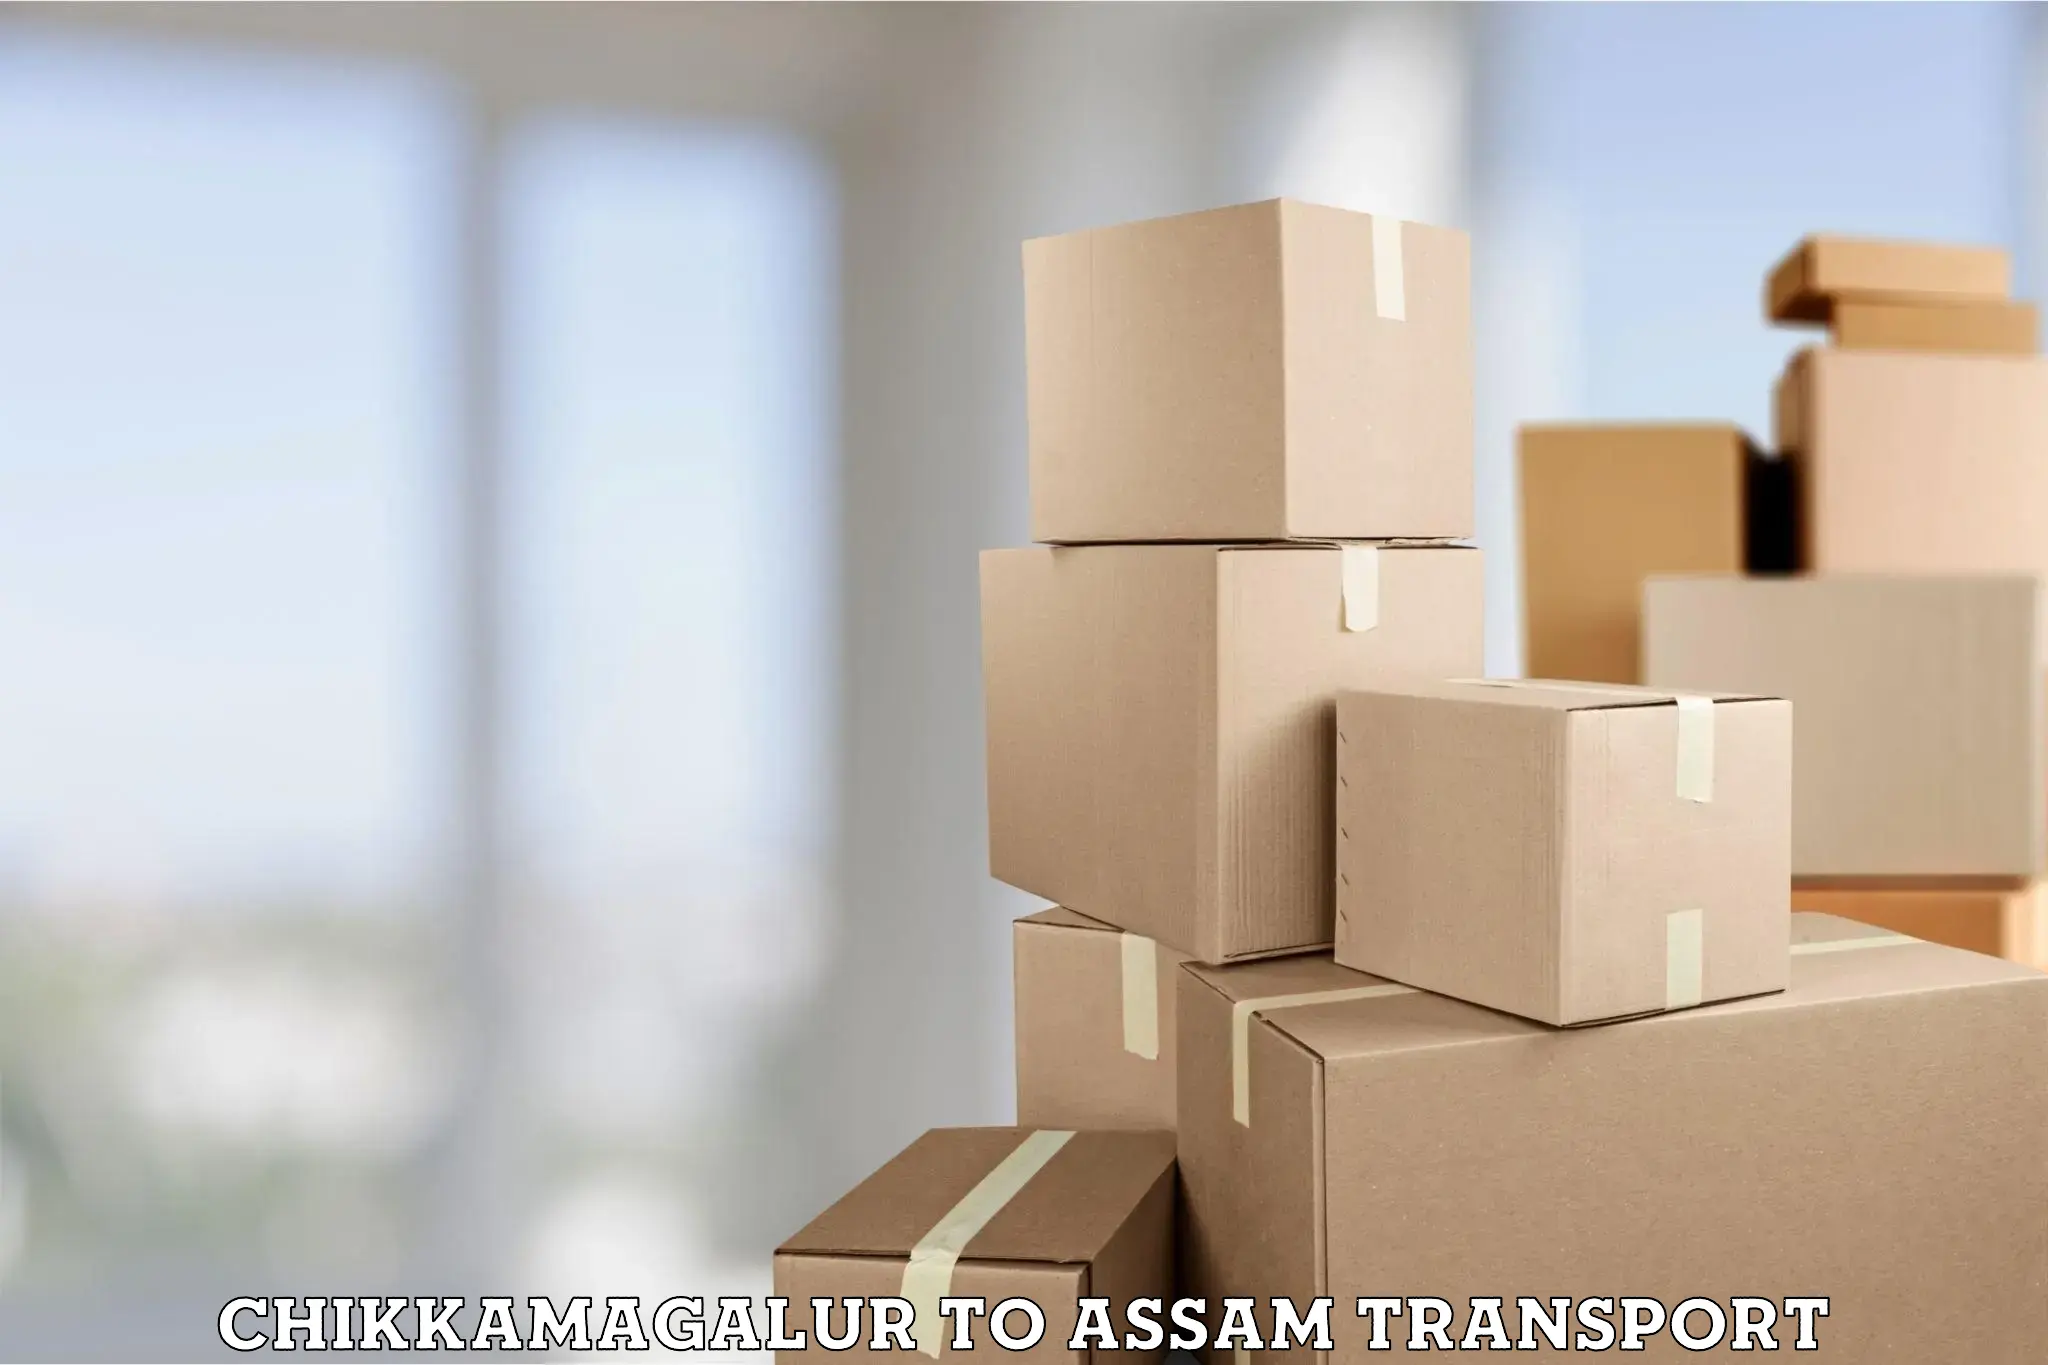 Container transport service Chikkamagalur to Guwahati